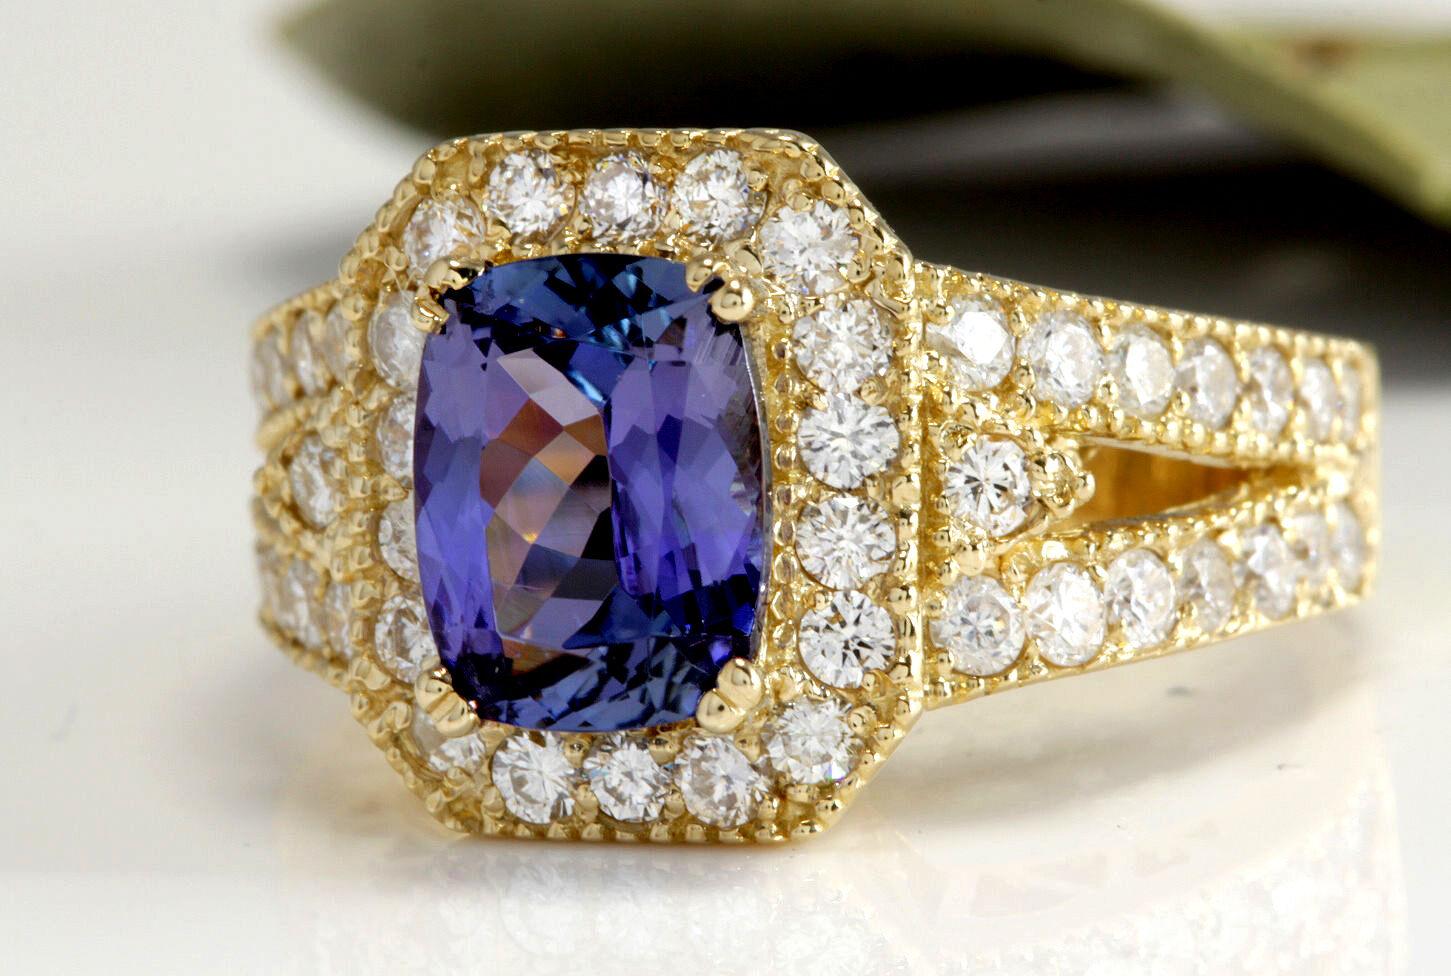 3.30 Carats Natural Very Nice Looking Tanzanite and Diamond 18K Solid Yellow Gold Ring

Suggested Replacement Value:  Approx. $7,000.00

Total Natural Oval Cut Tanzanite Weight is: Approx. 2.10 Carats

Center Tanzanite Measures: 9.00 x 7.00